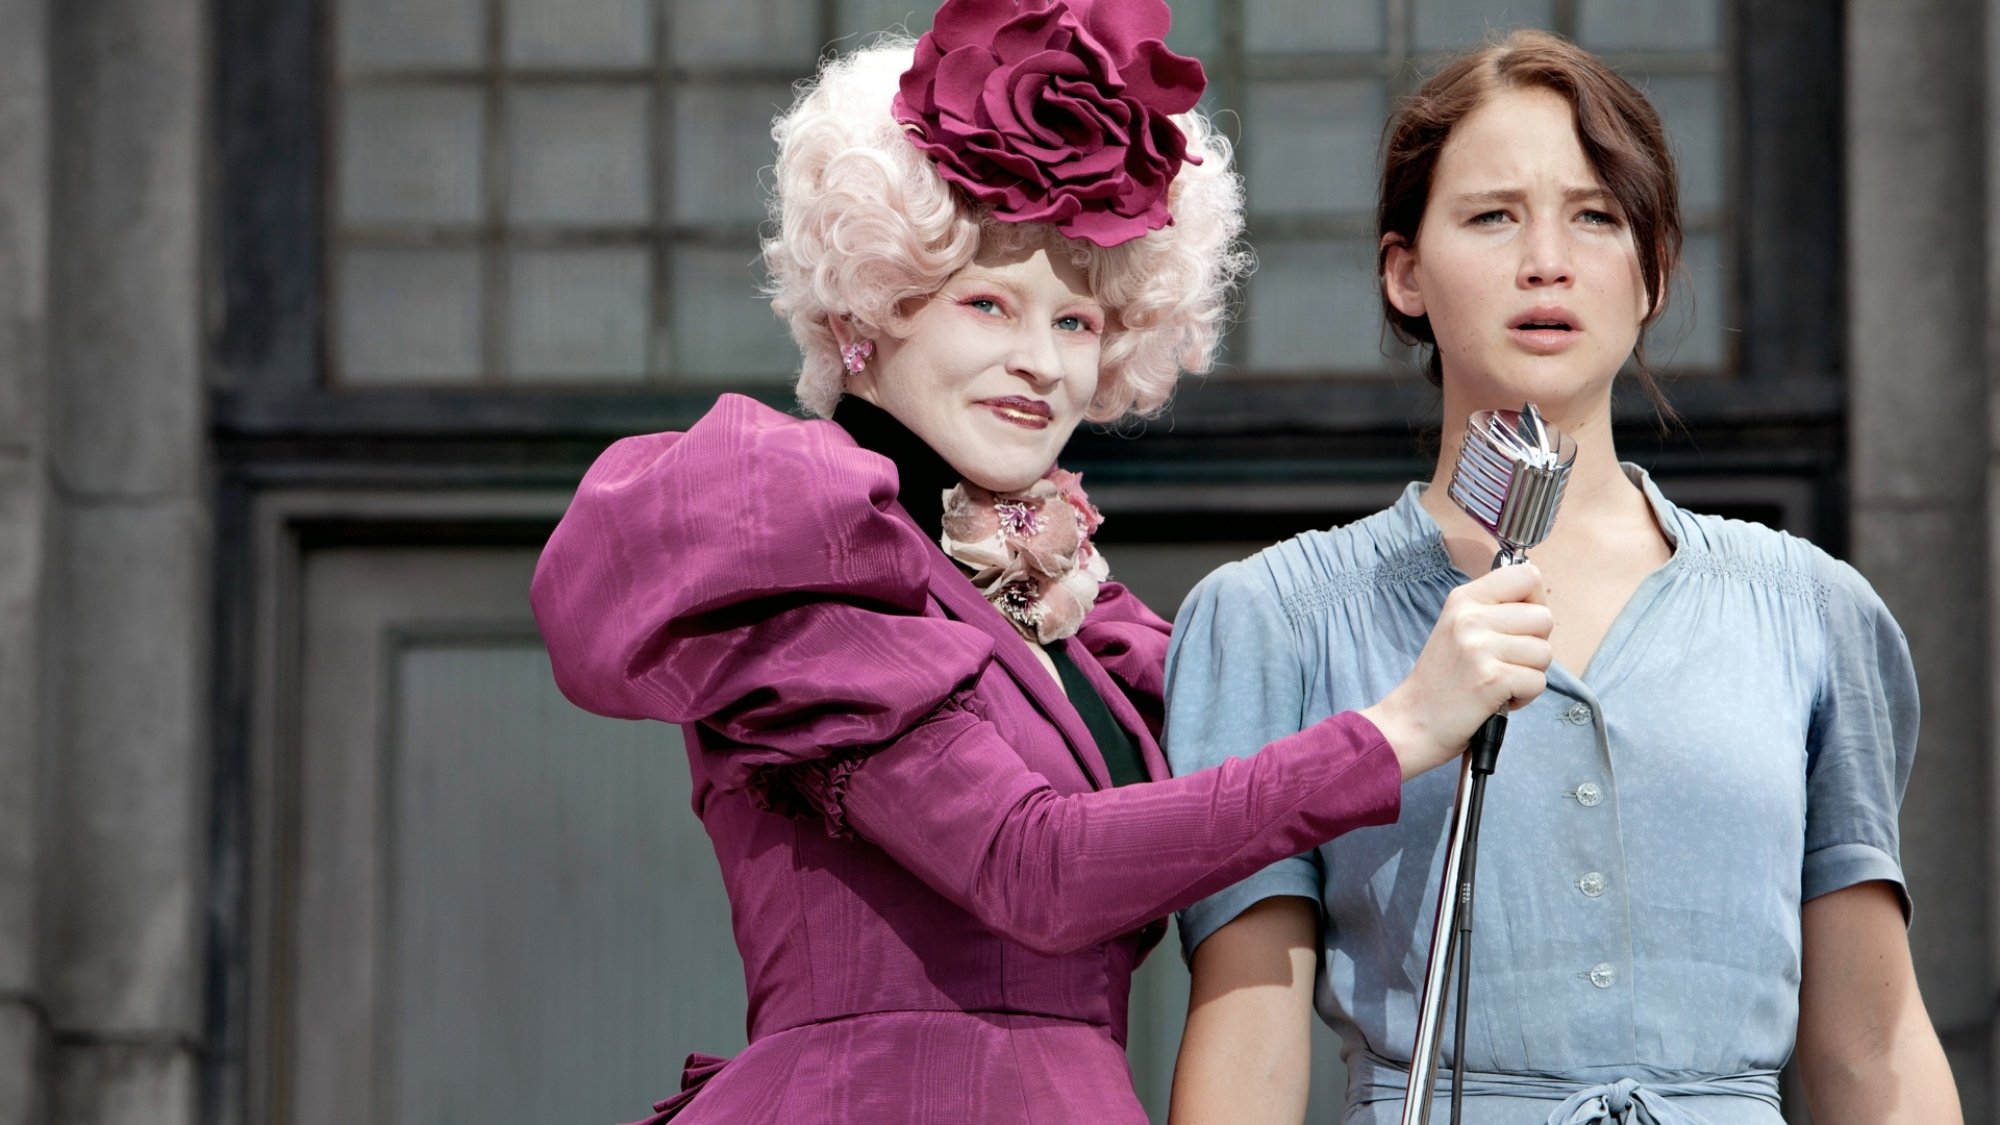 Elizabeth Banks and Jennifer Lawrence share a moment in "The Hunger Games"